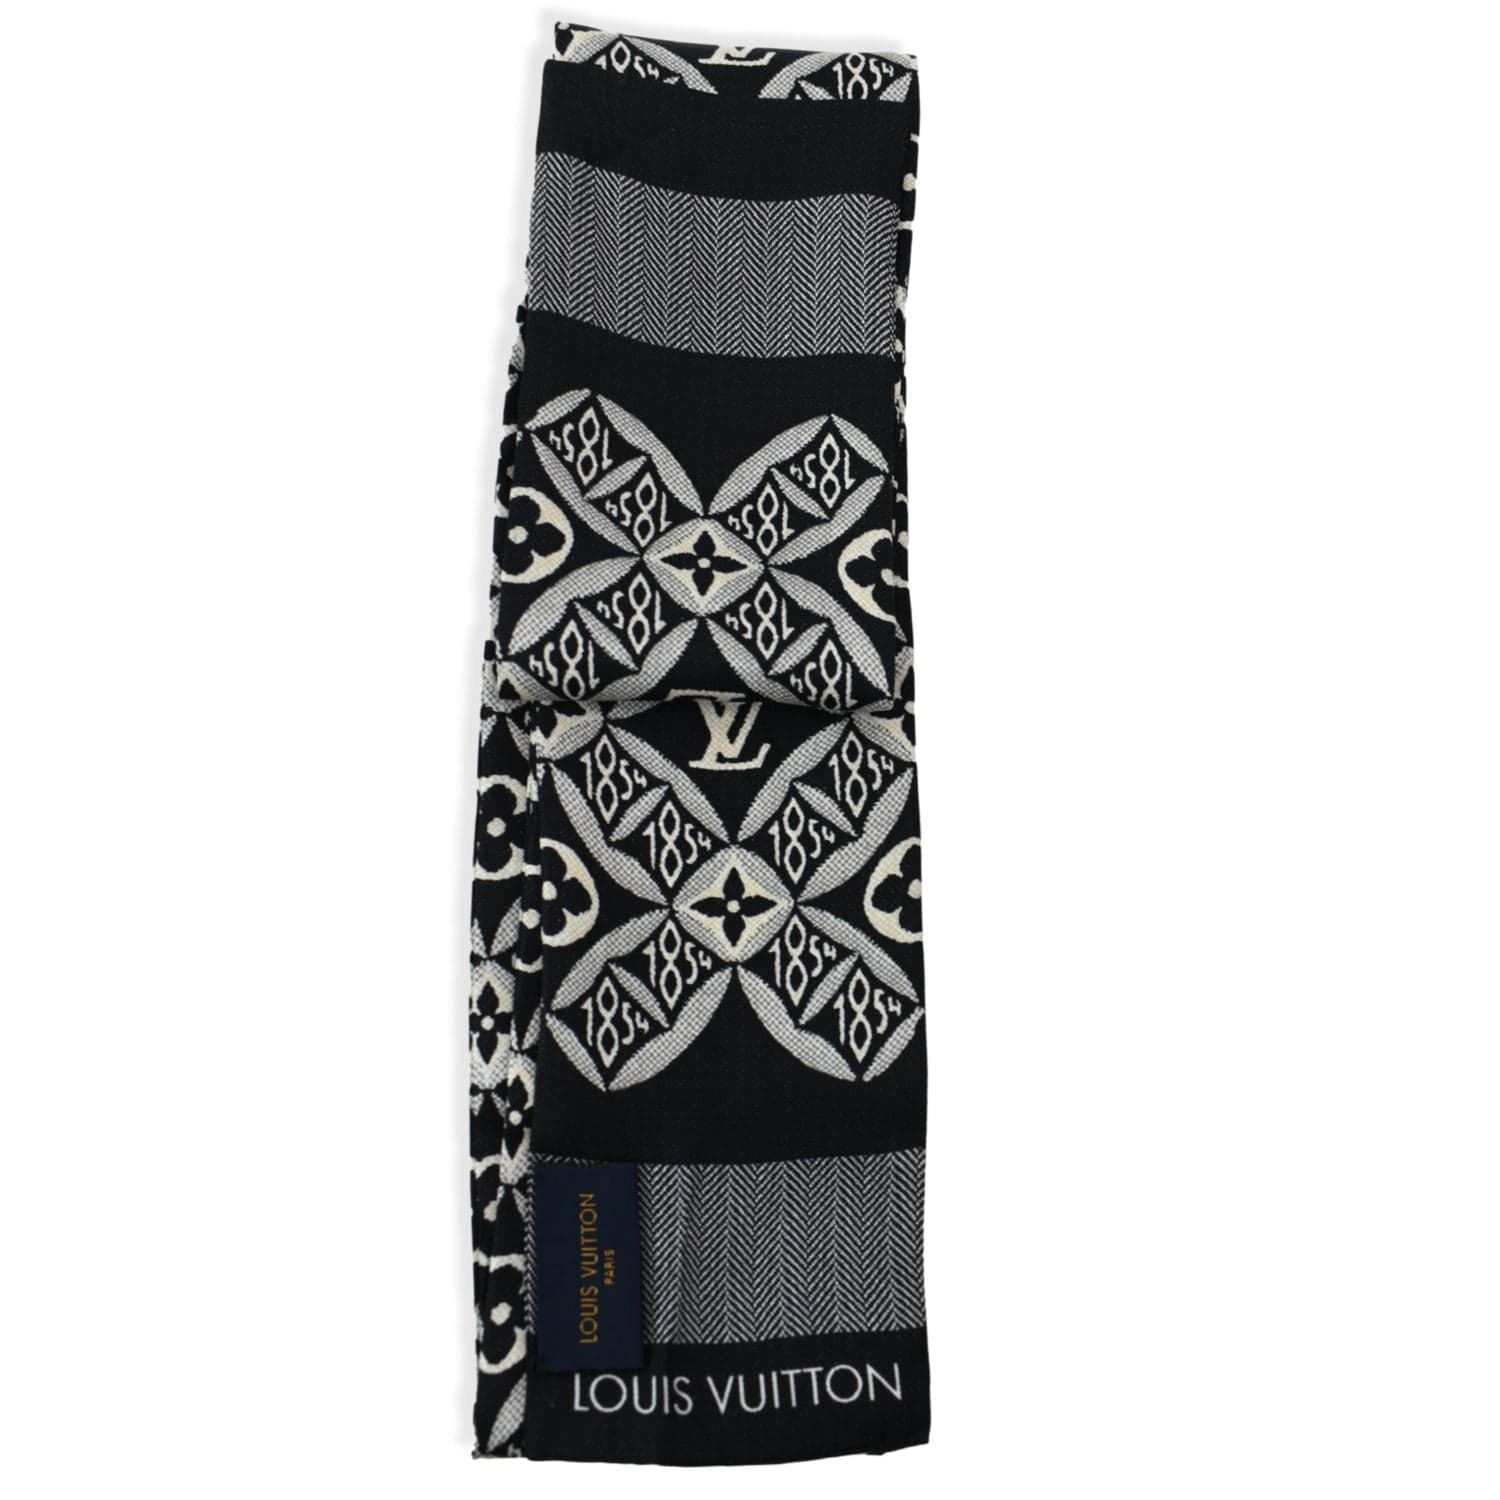 Only 122.50 usd for Louis Vuitton Since 1854 Square 45 Silk Scarf